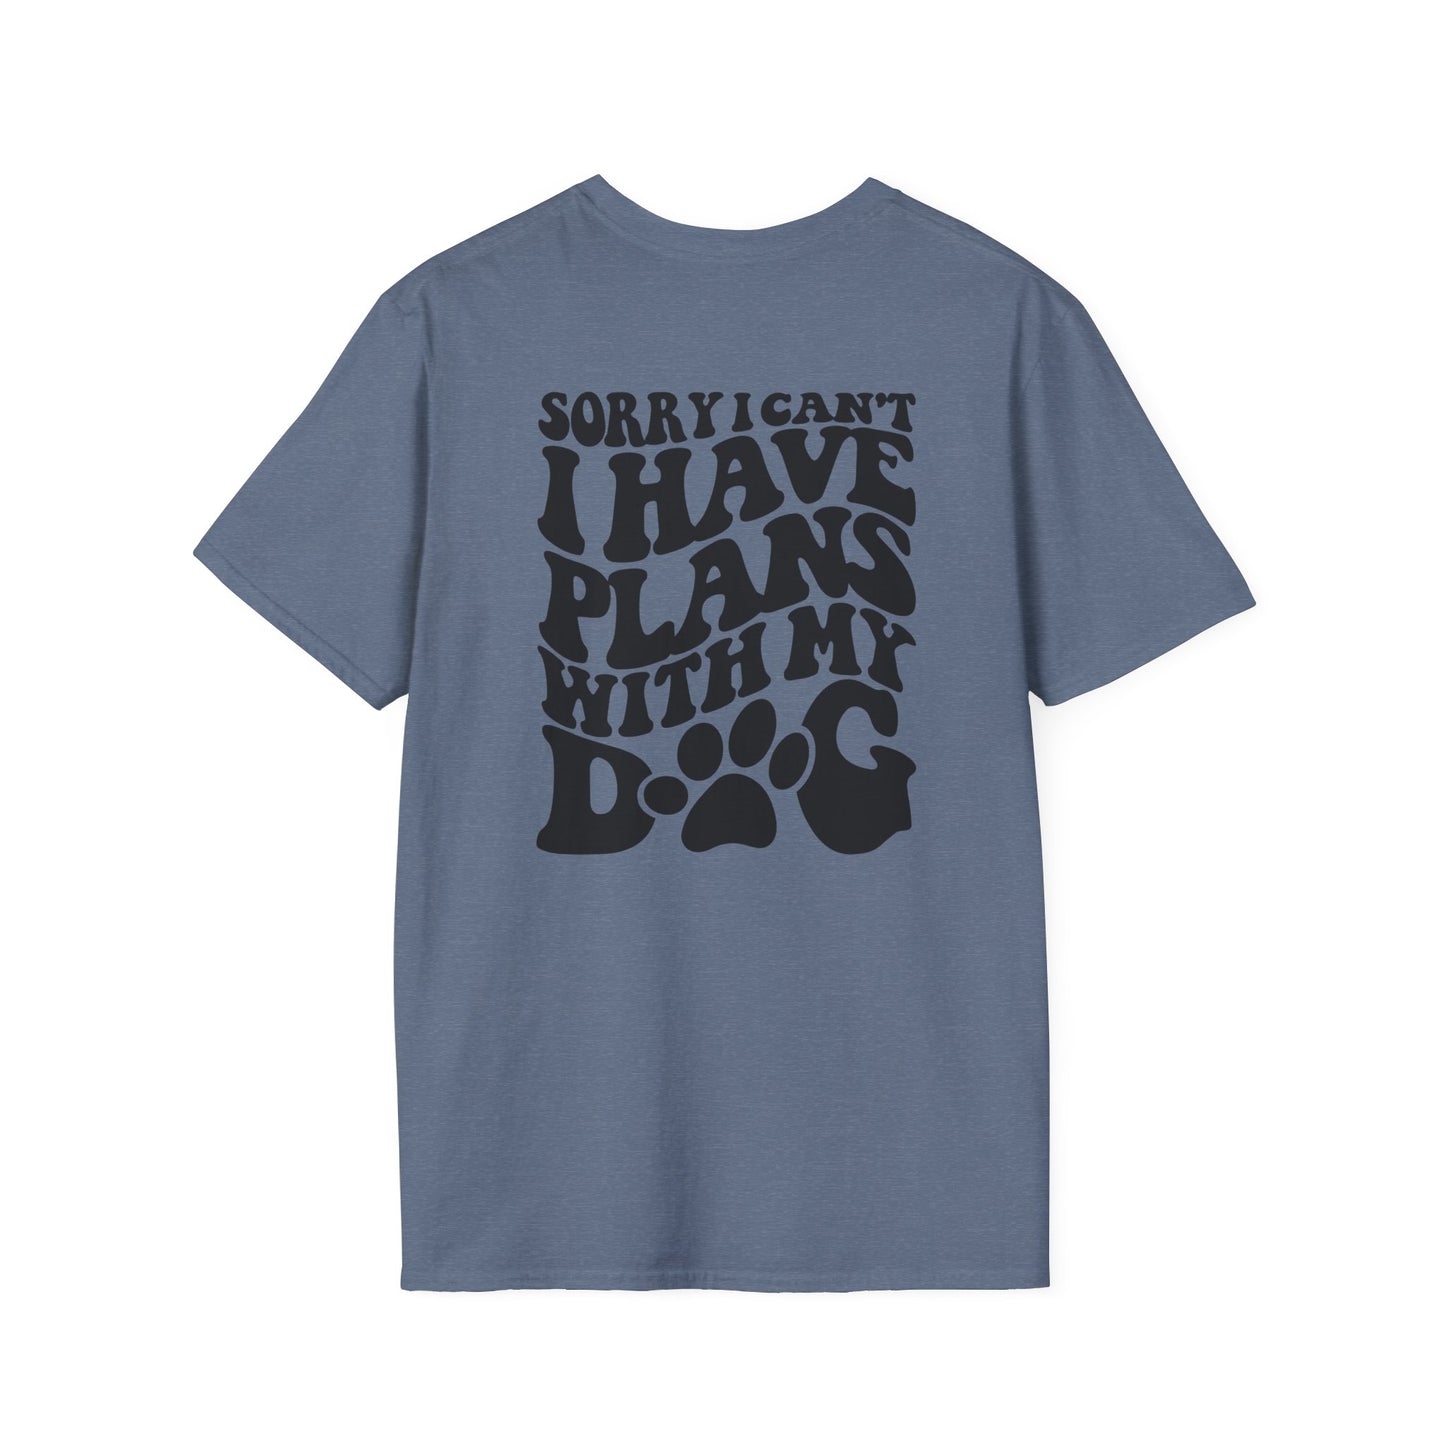 I have plans with my DOG - Unisex Softstyle T-Shirt